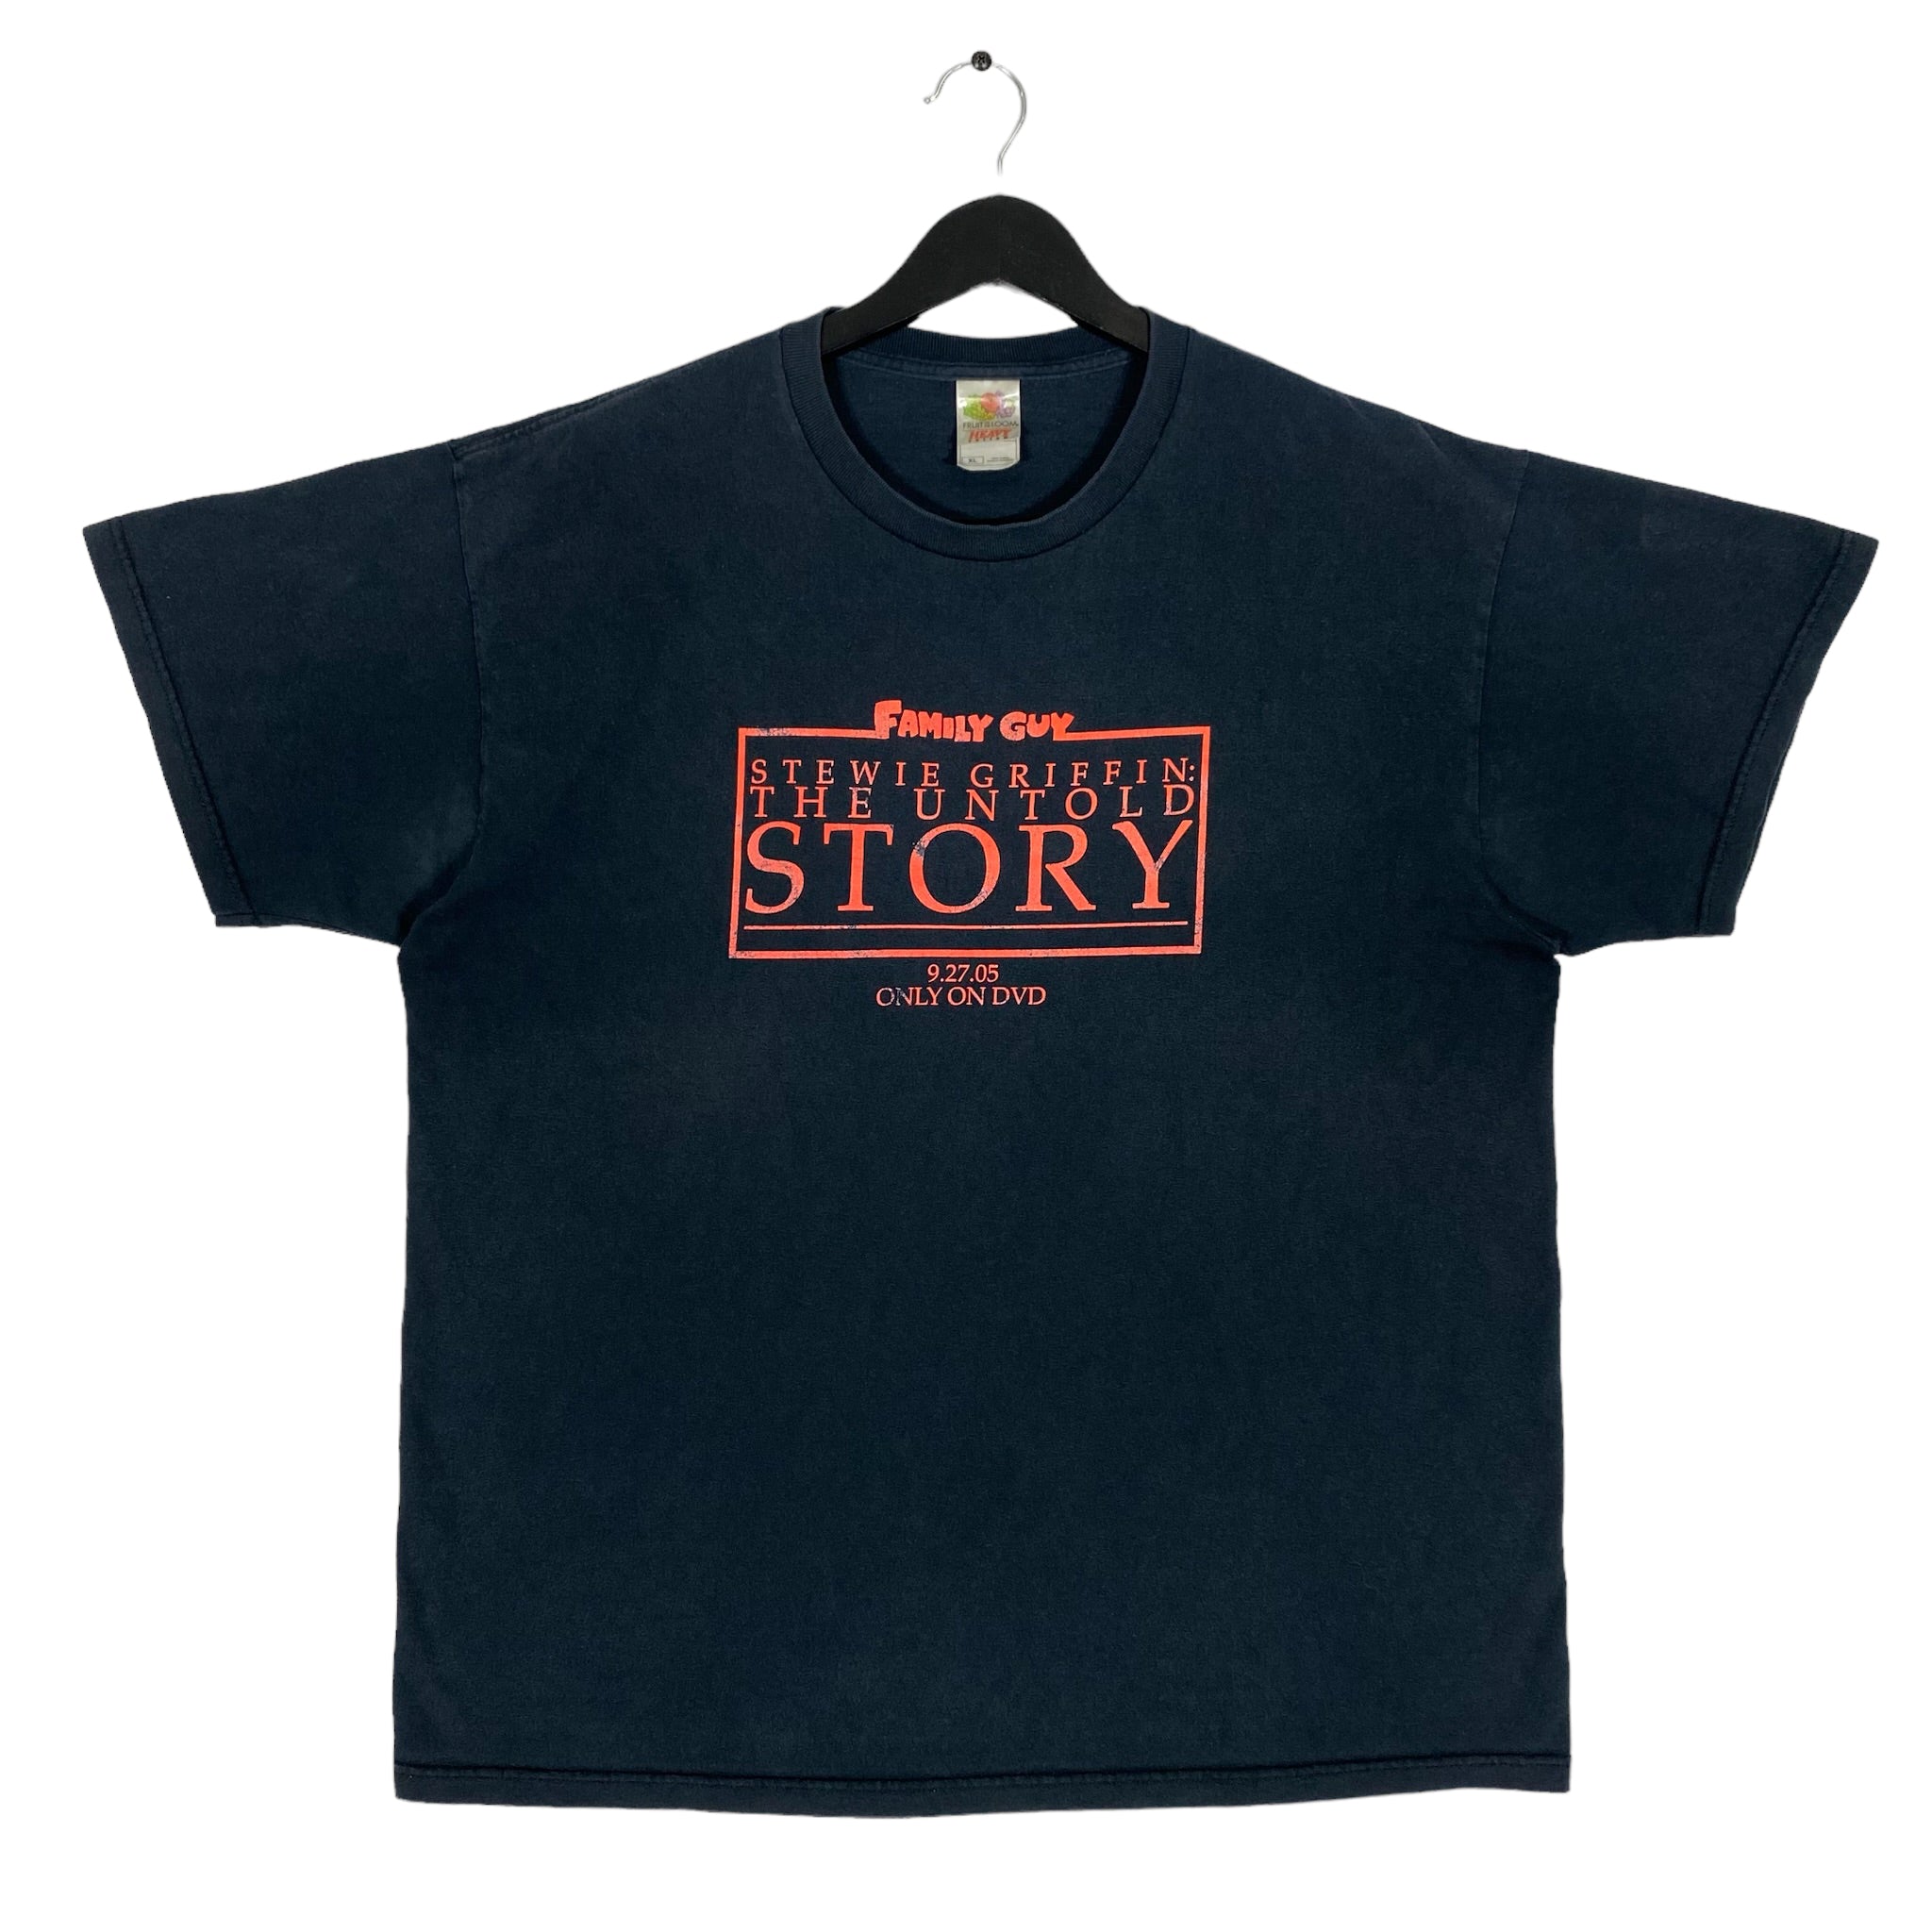 Vintage Family Guy "The Untold Story" Promo Tee